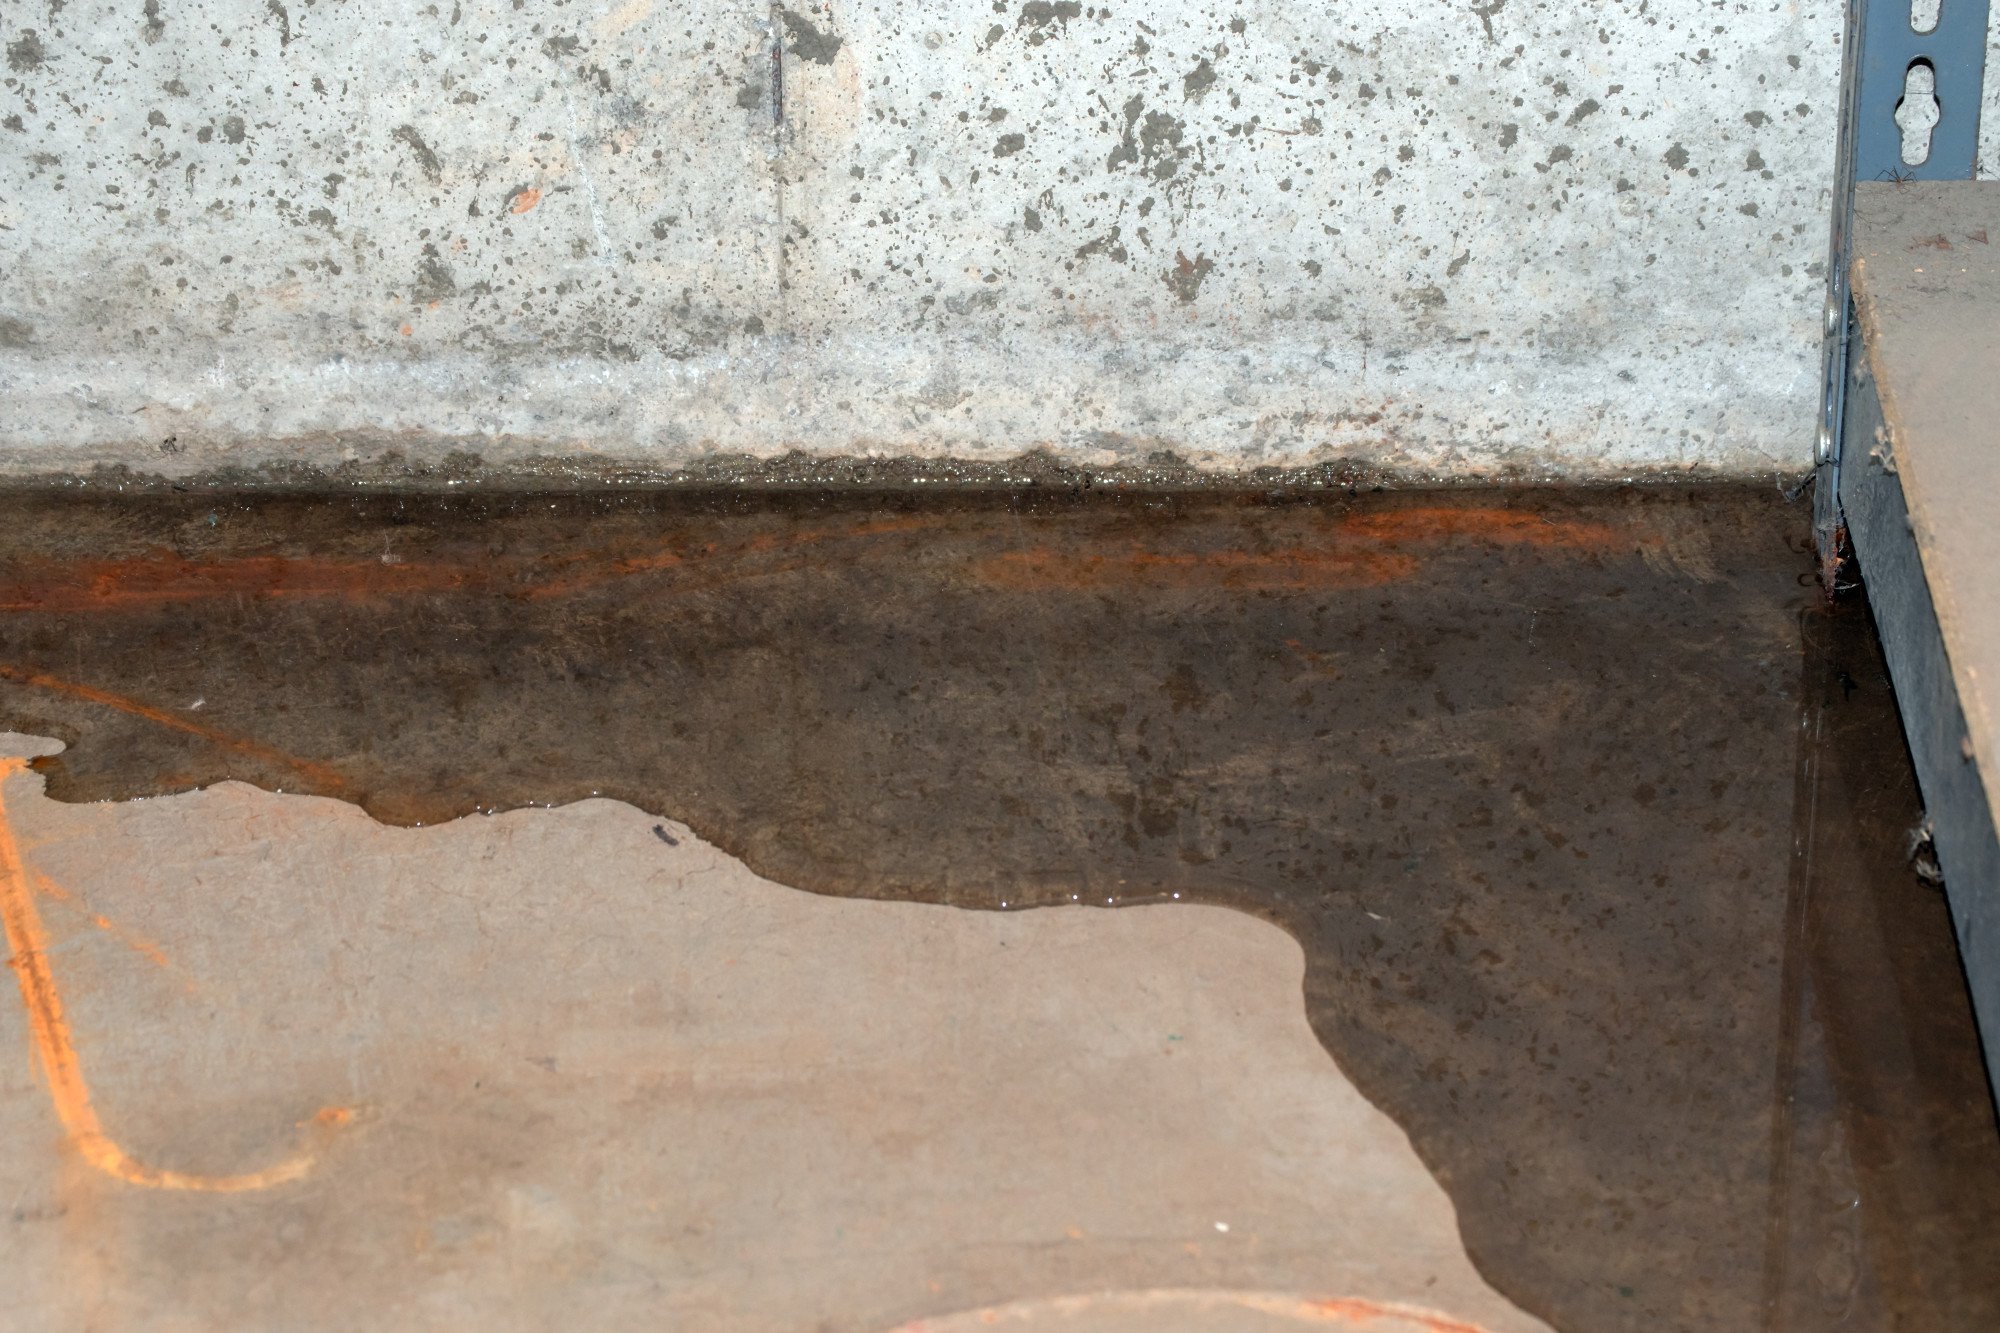 How Long Does Waterproofing Last? - image of basement floor leaking water at the corner where the wall meets the floor.